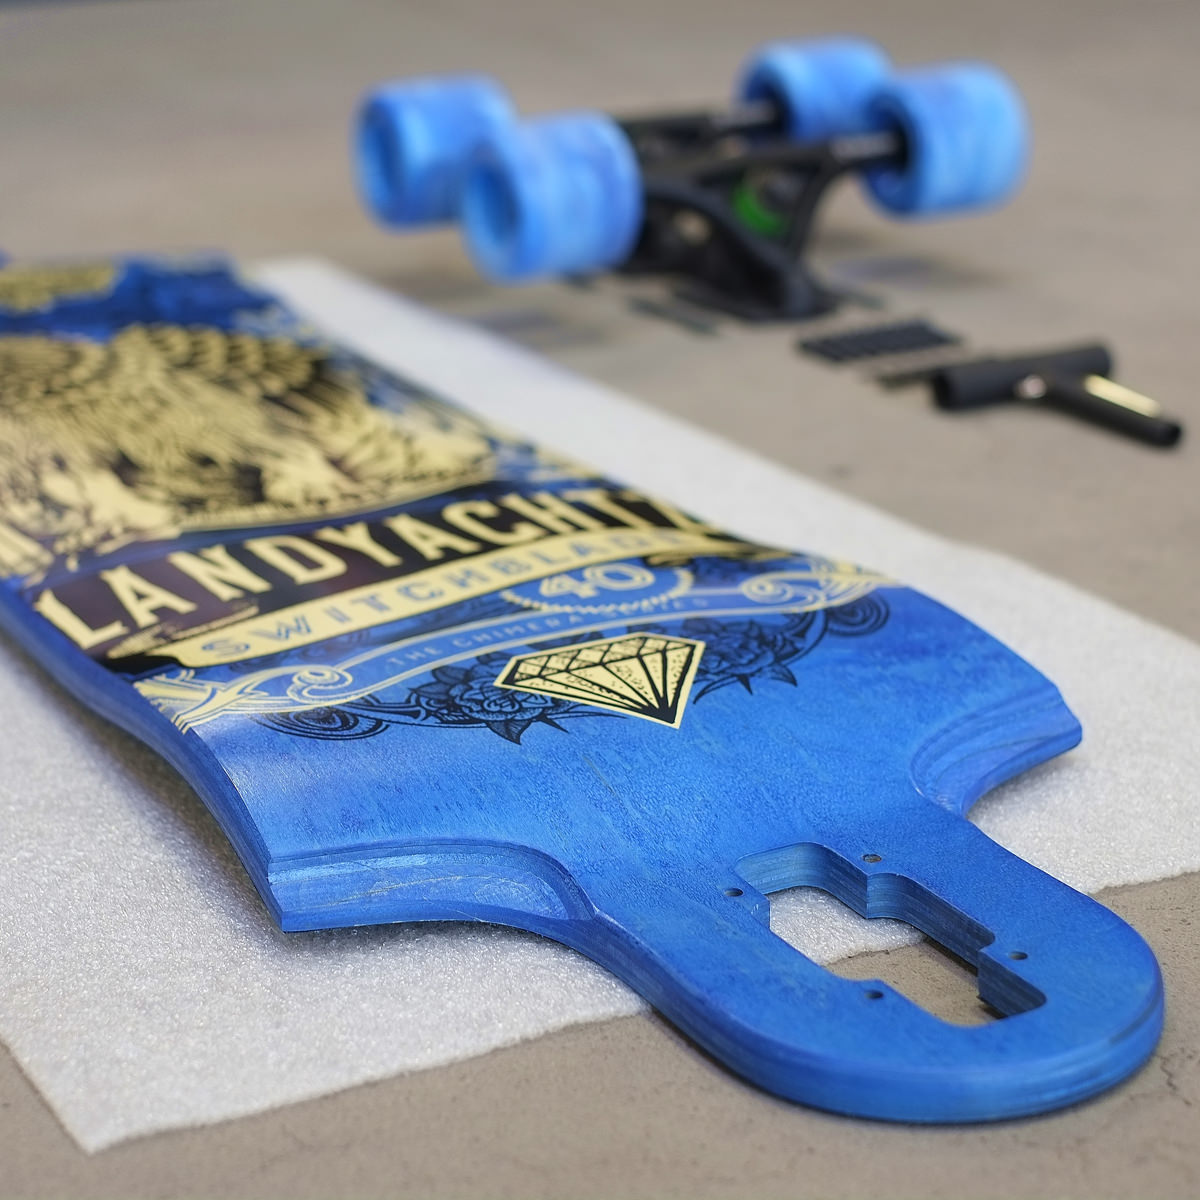 DIY: How To Assemble A Drop Through Deck - The Longboard Store